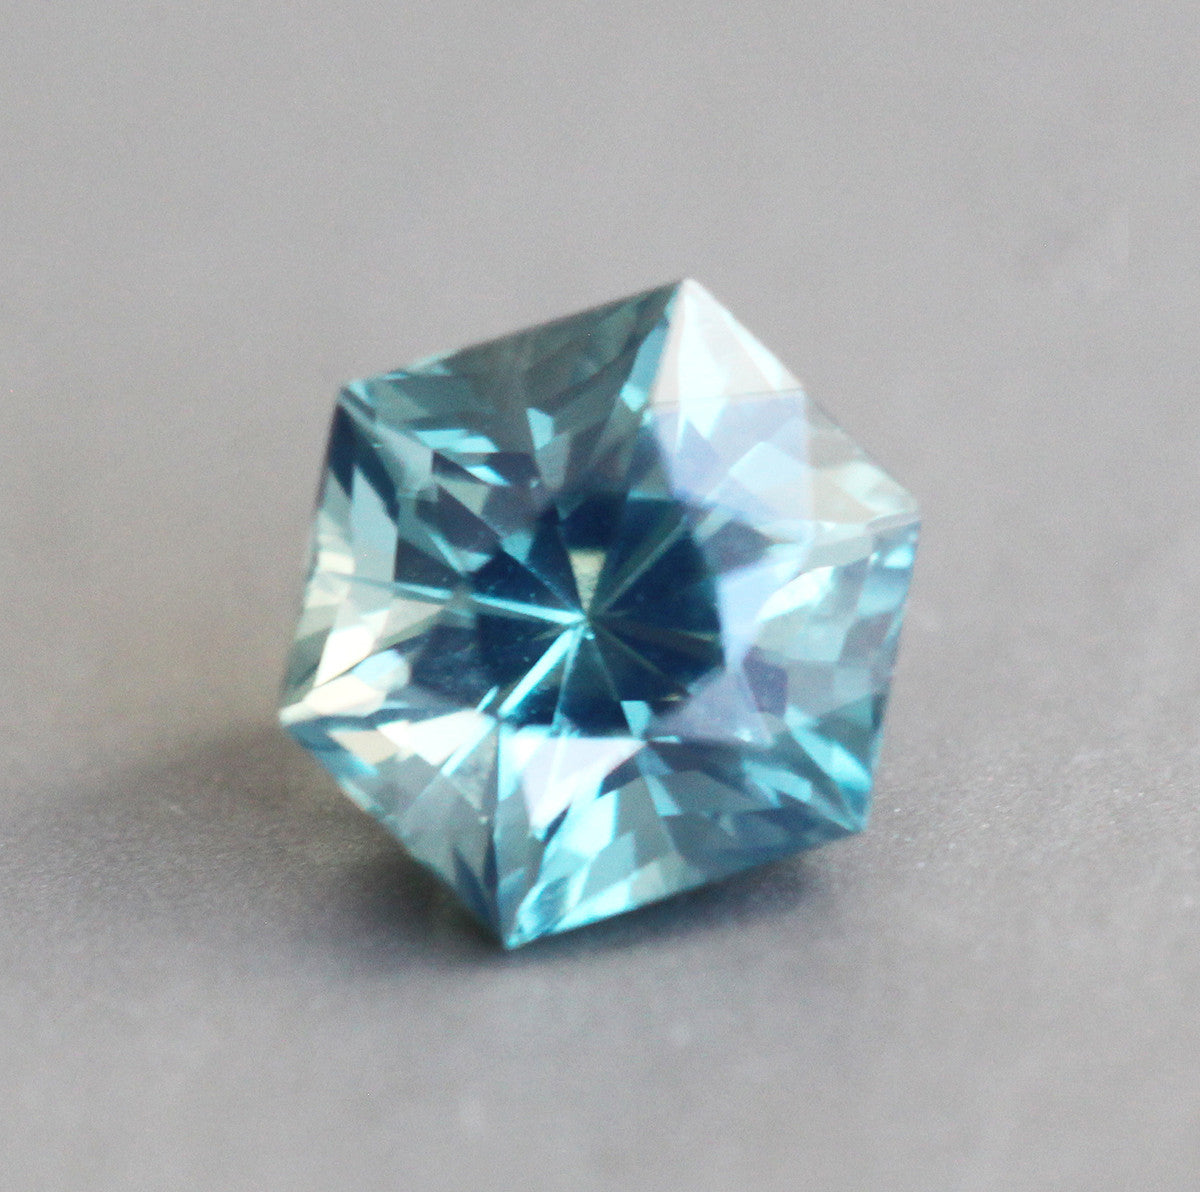 Loose hexagon-shaped teal sapphire